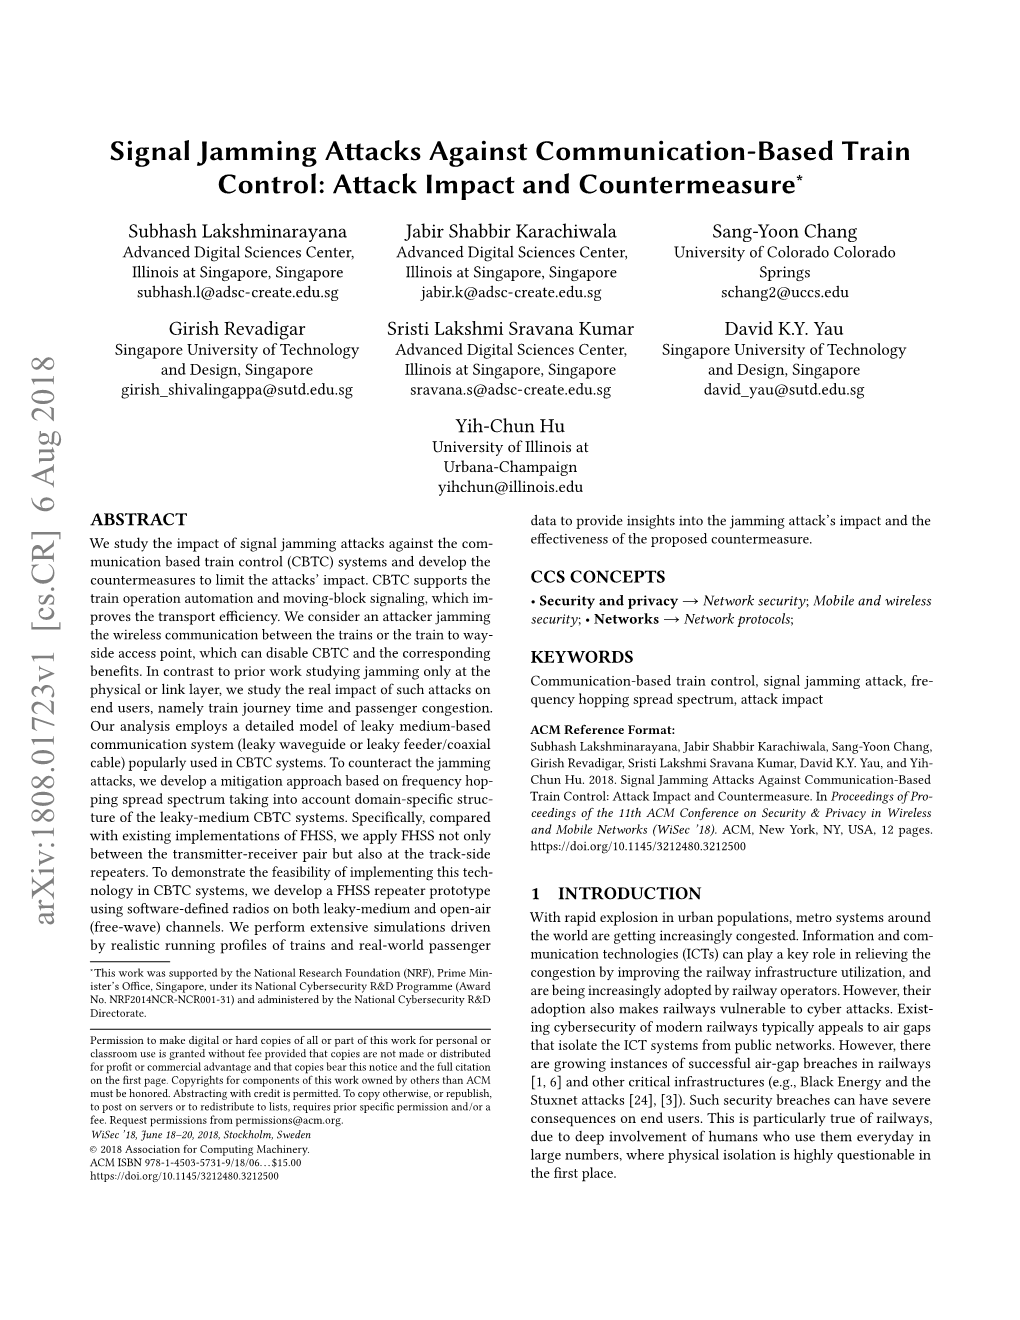 Signal Jamming Attacks Against Communication-Based Train Control: Attack Impact and Countermeasure∗